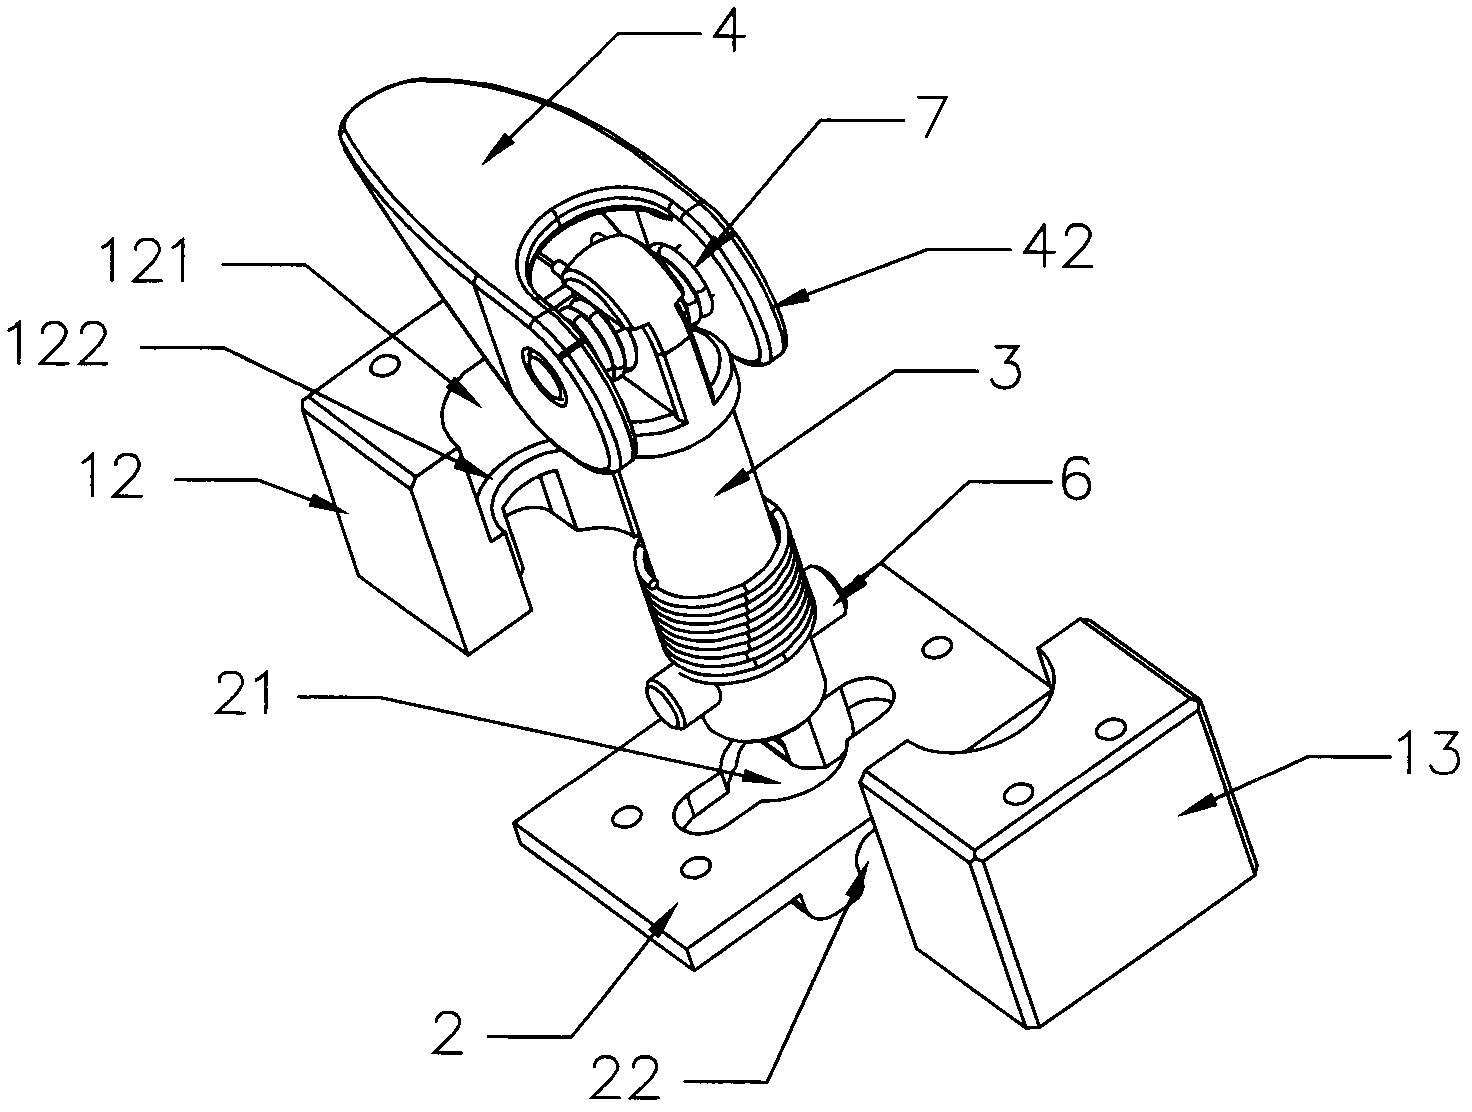 Fast locking and connecting device